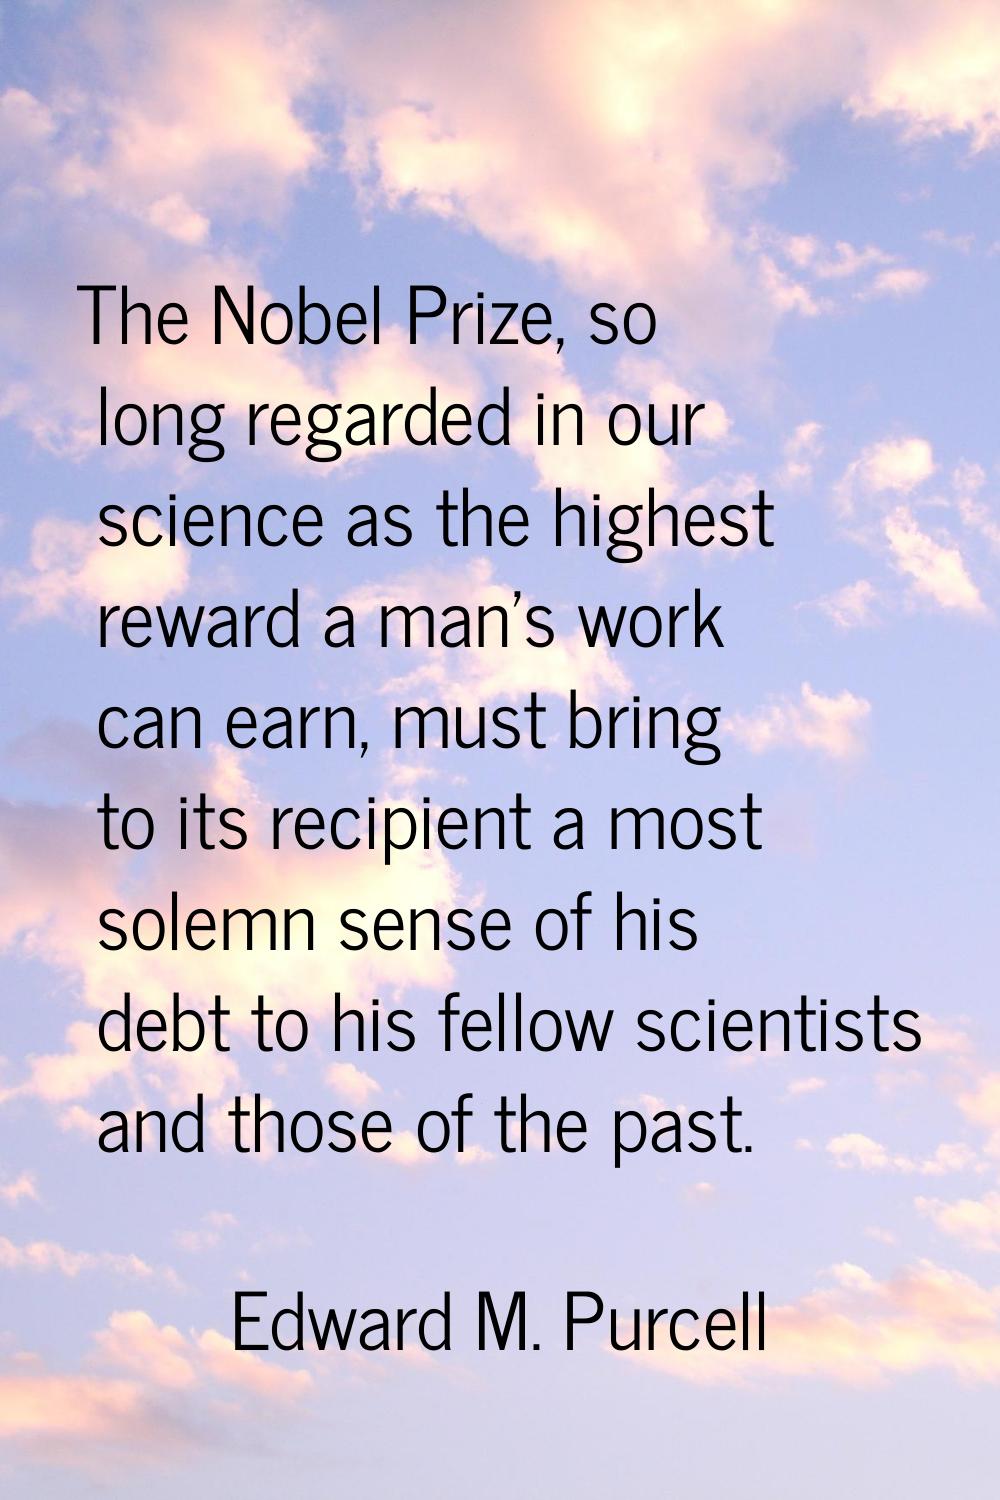 The Nobel Prize, so long regarded in our science as the highest reward a man's work can earn, must 